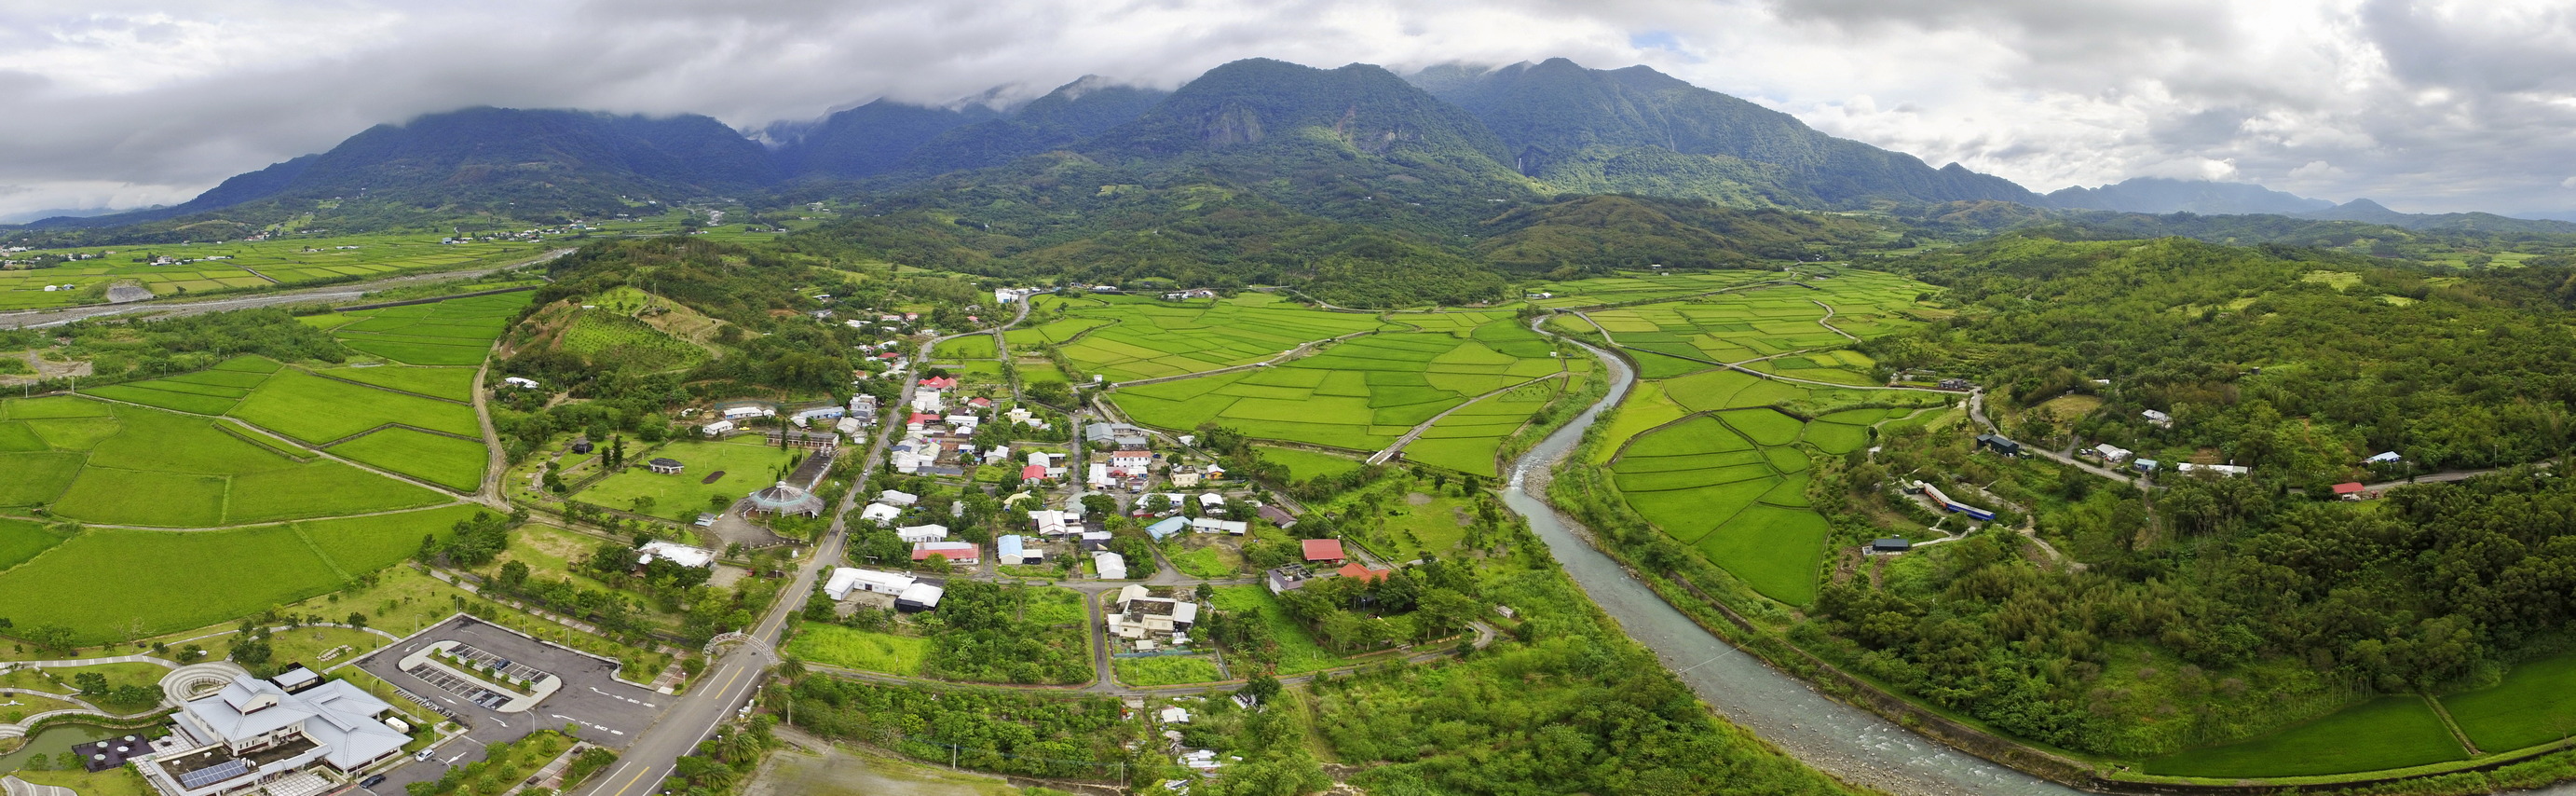 Hualien District Agricultural Research and Extension Station, Ministry of Agriculture